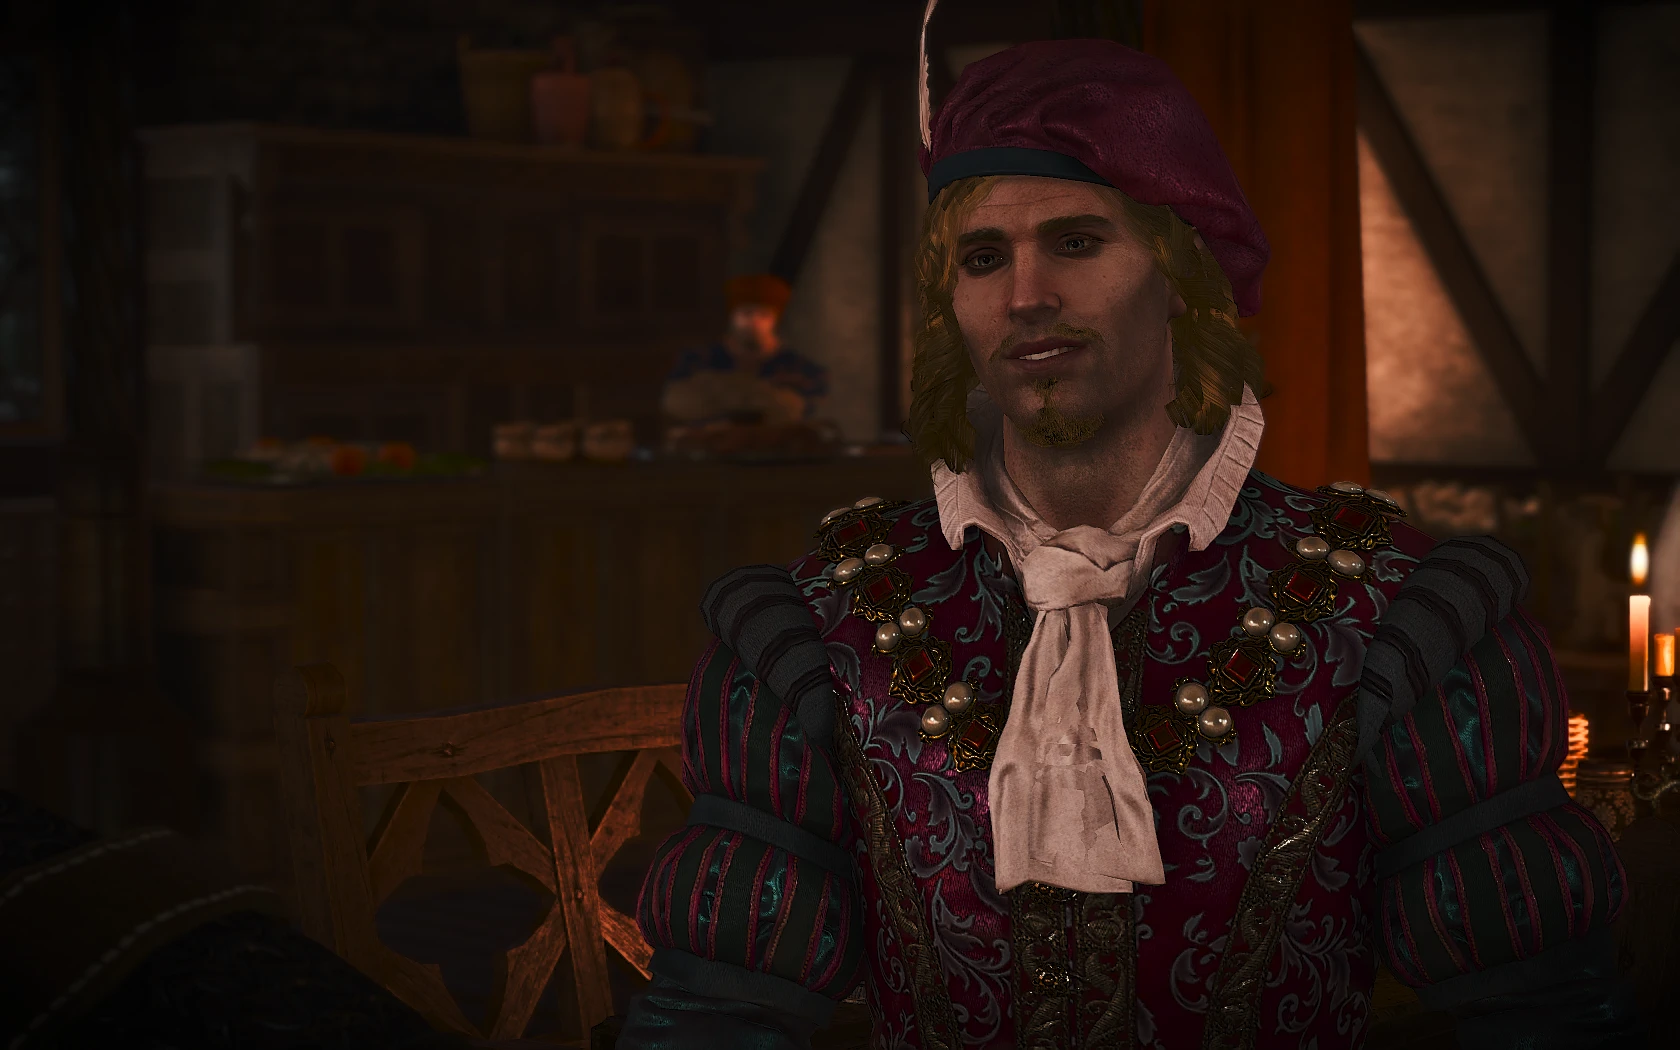 Alternative Appearance for Dandelion at The Witcher 3 Nexus - Mods and